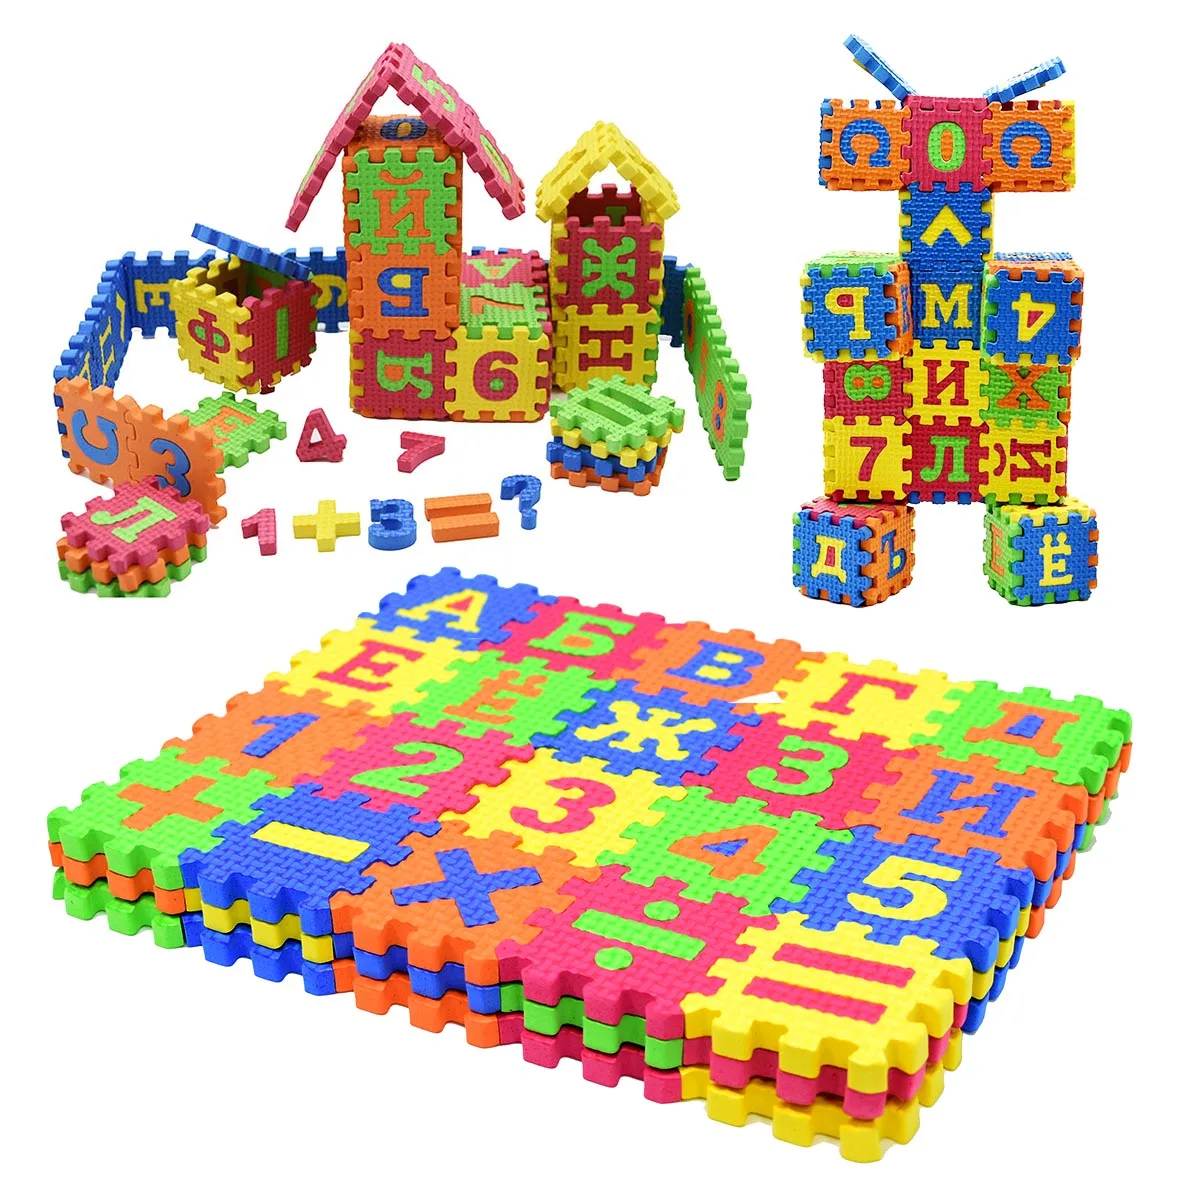 Russian Letters Puzzle, Foam Mats Babies Play